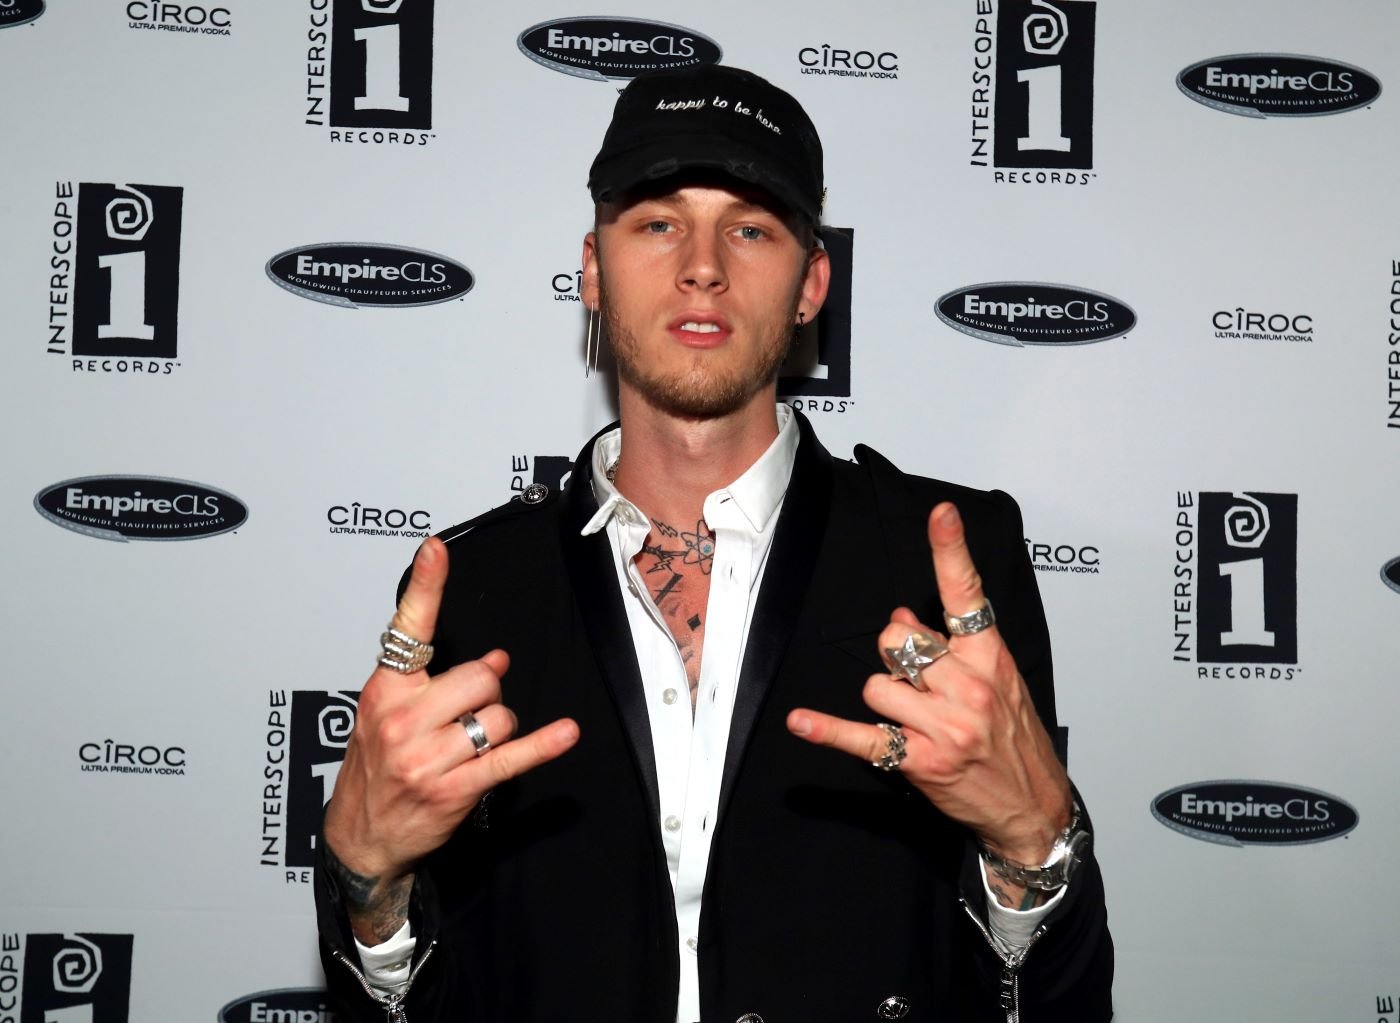 Machine Gun Kelly emma cannon relationship is a thing of the past. Here he is wearing a white dress shirt and black jacket standing in front of a white background with black writing and shapes on it.